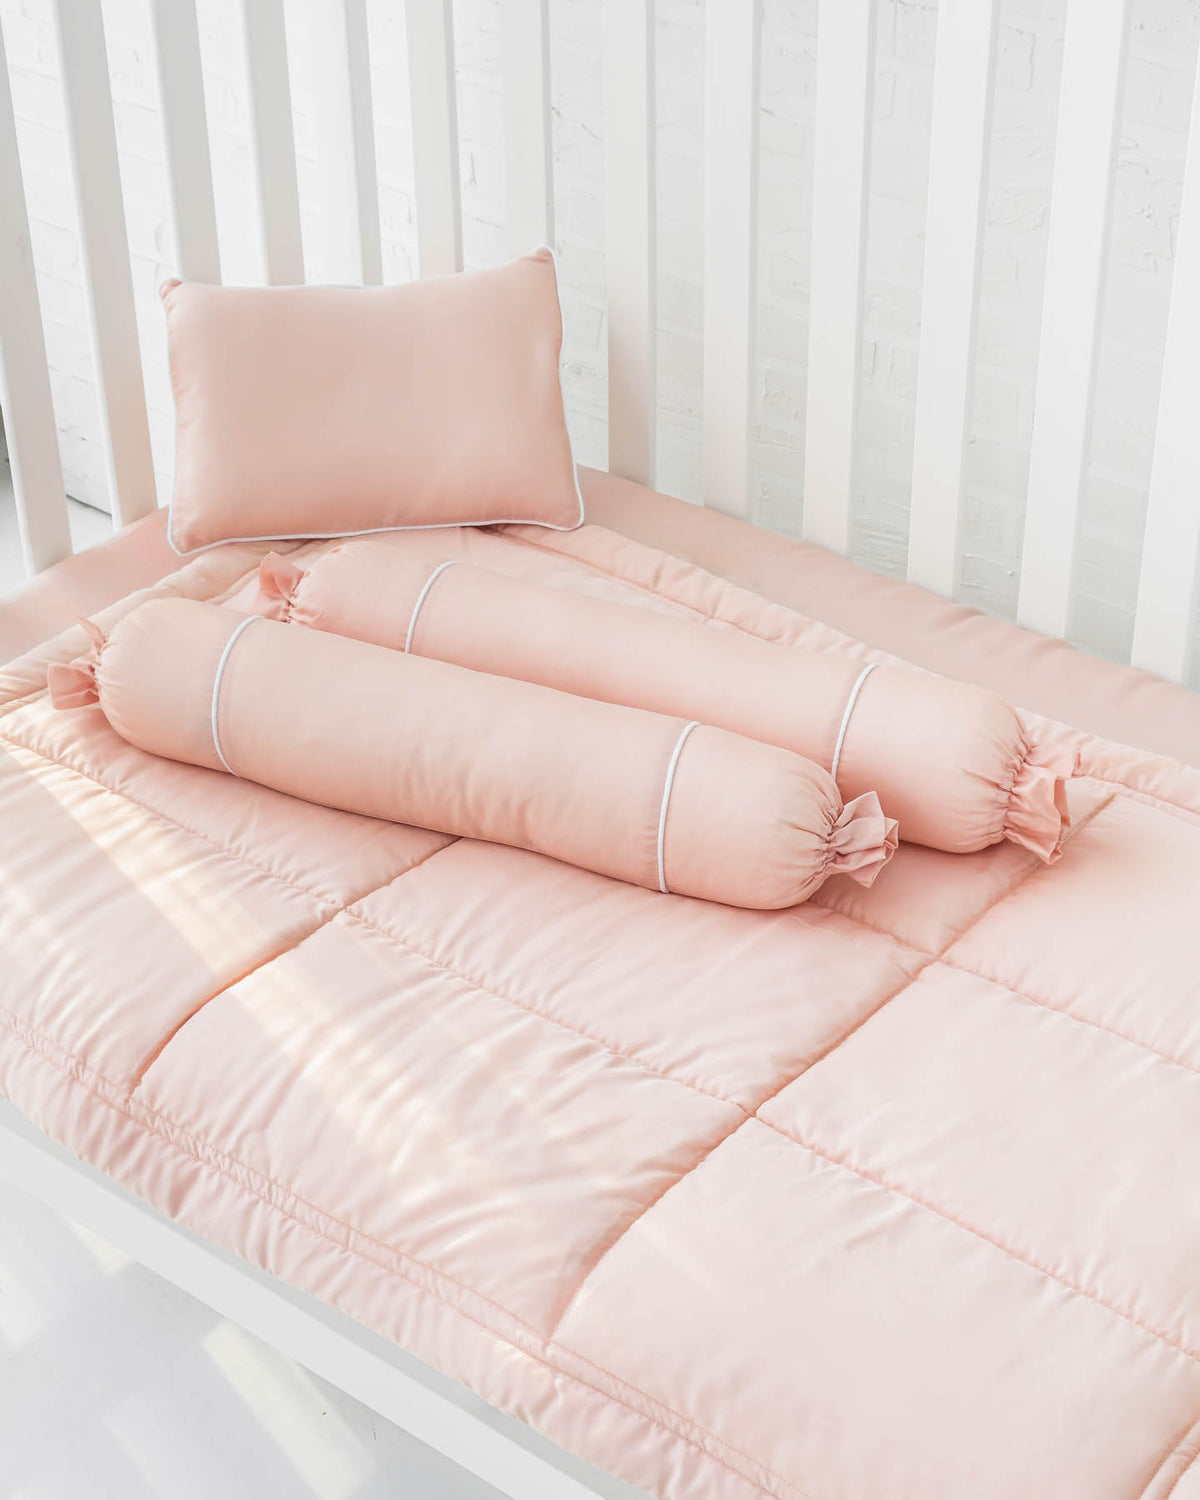 White crib with blush peach pink organic bamboo lyocell baby bedding (baby comforter set - 1 pillowcase, 2 bolstercases, 1 comforter; baby pillow set - 1 headshaping pillow, 2 bolsters; crib fitted sheet)